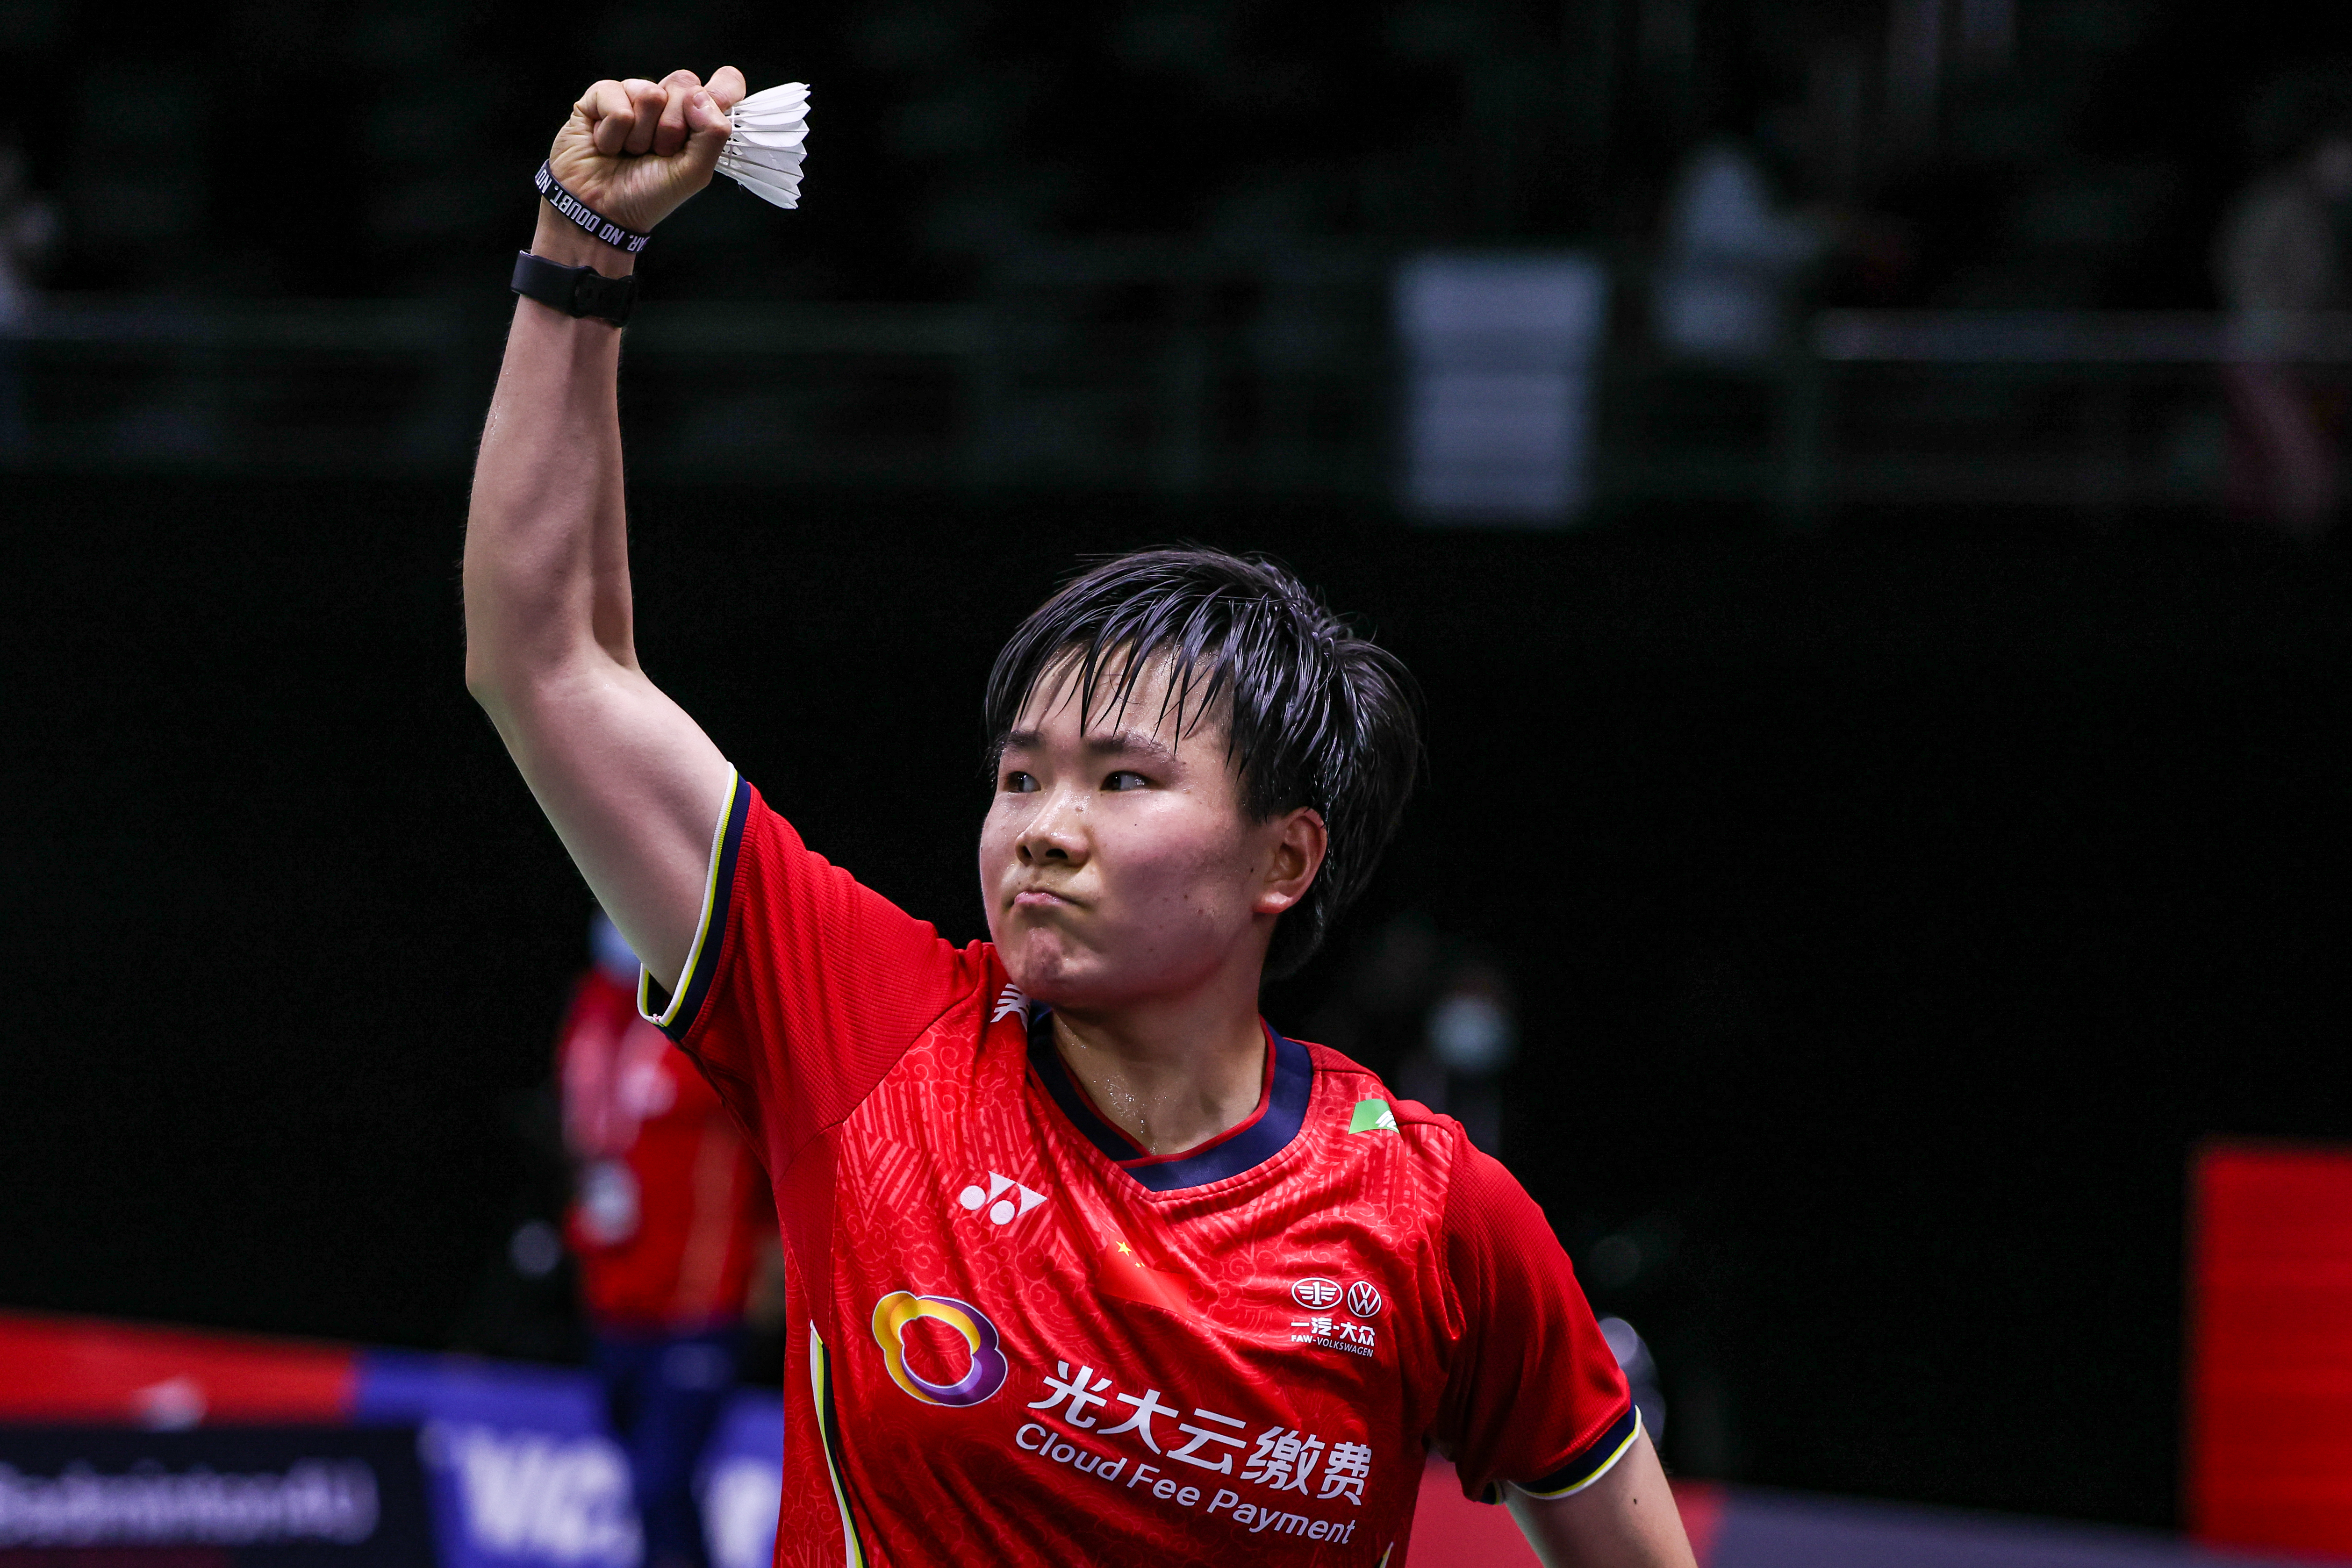 He Bingjiao of China had to come from a game down to clinch the top spot in group B. Erika Sawauchi/BWF